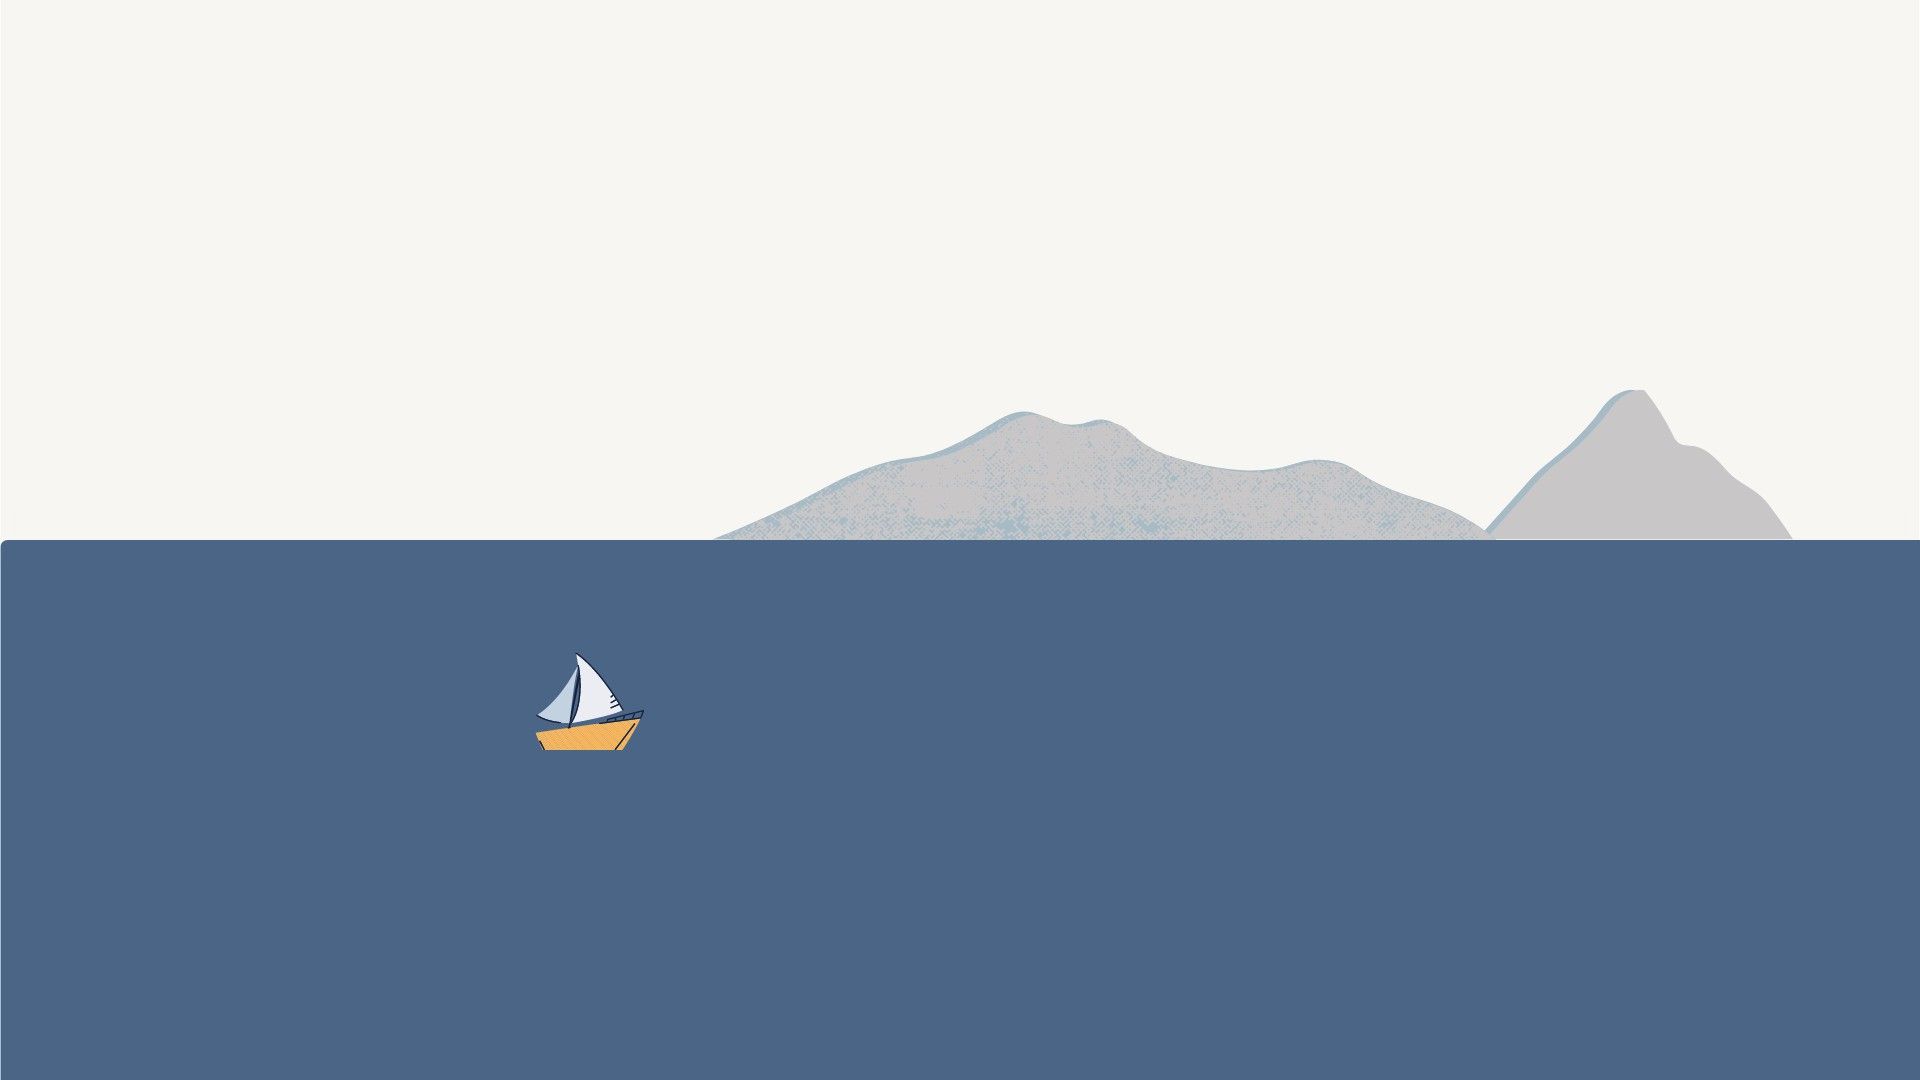 A boat is sailing in the ocean - Minimalist